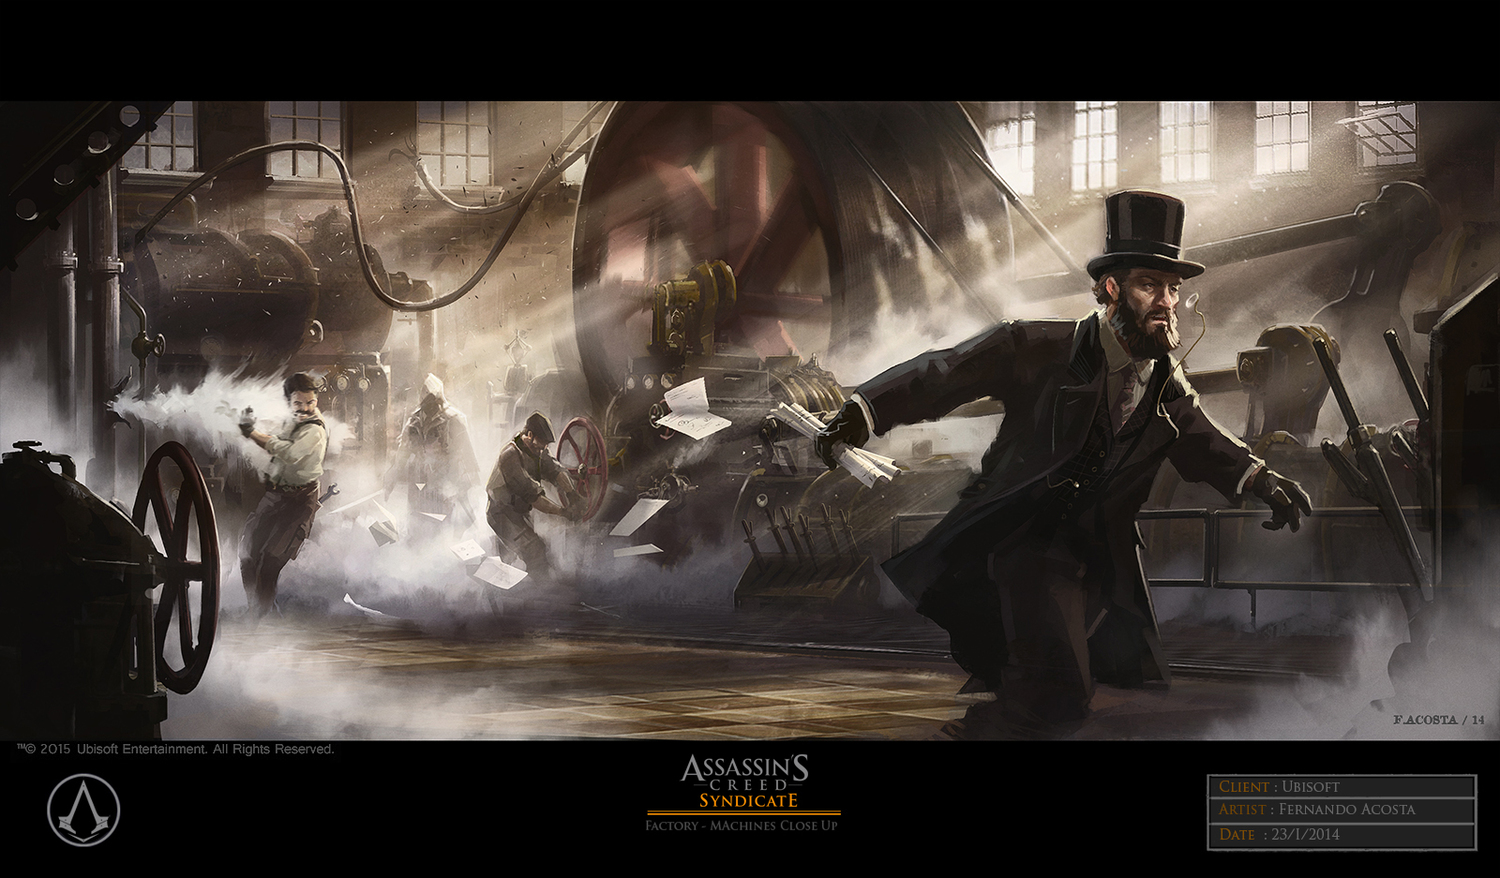 The Very Victorian Concept Art Of Assassin’s Creed Syndicate